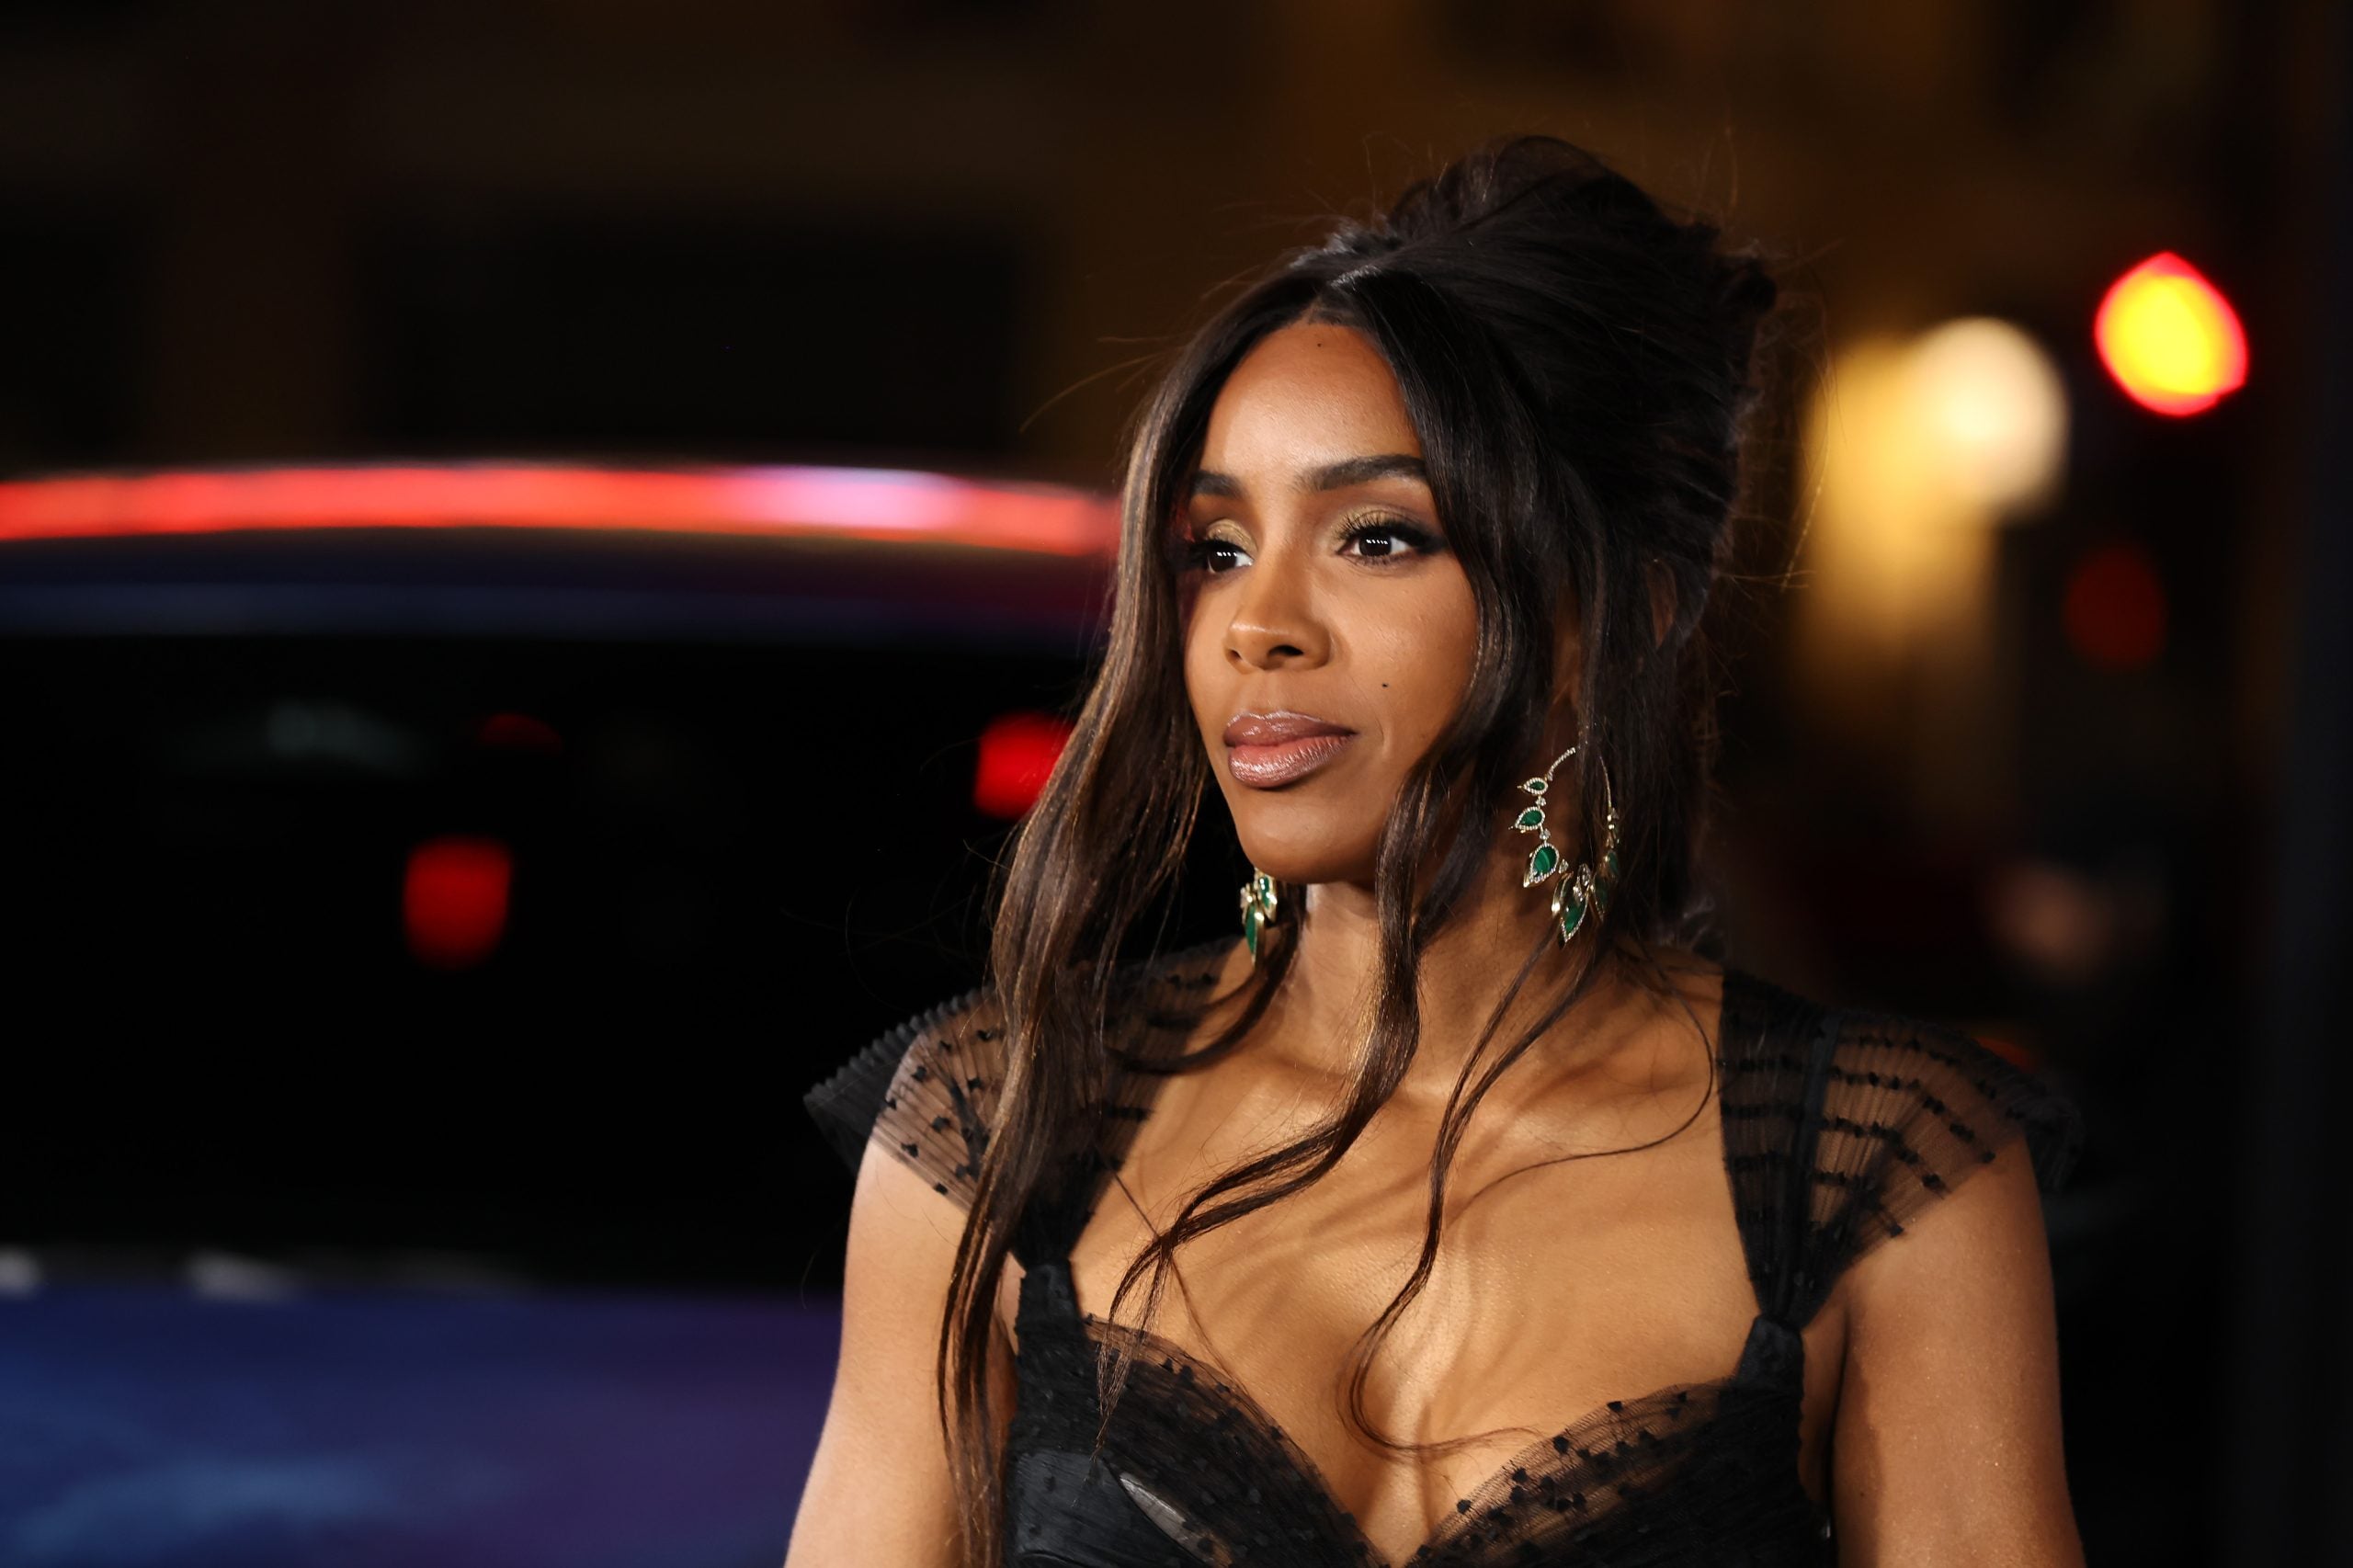 Star Gazing: Kelly Rowland, Halle Berry, Yahya Abdul-Mateen II and More Hit The Red Carpet